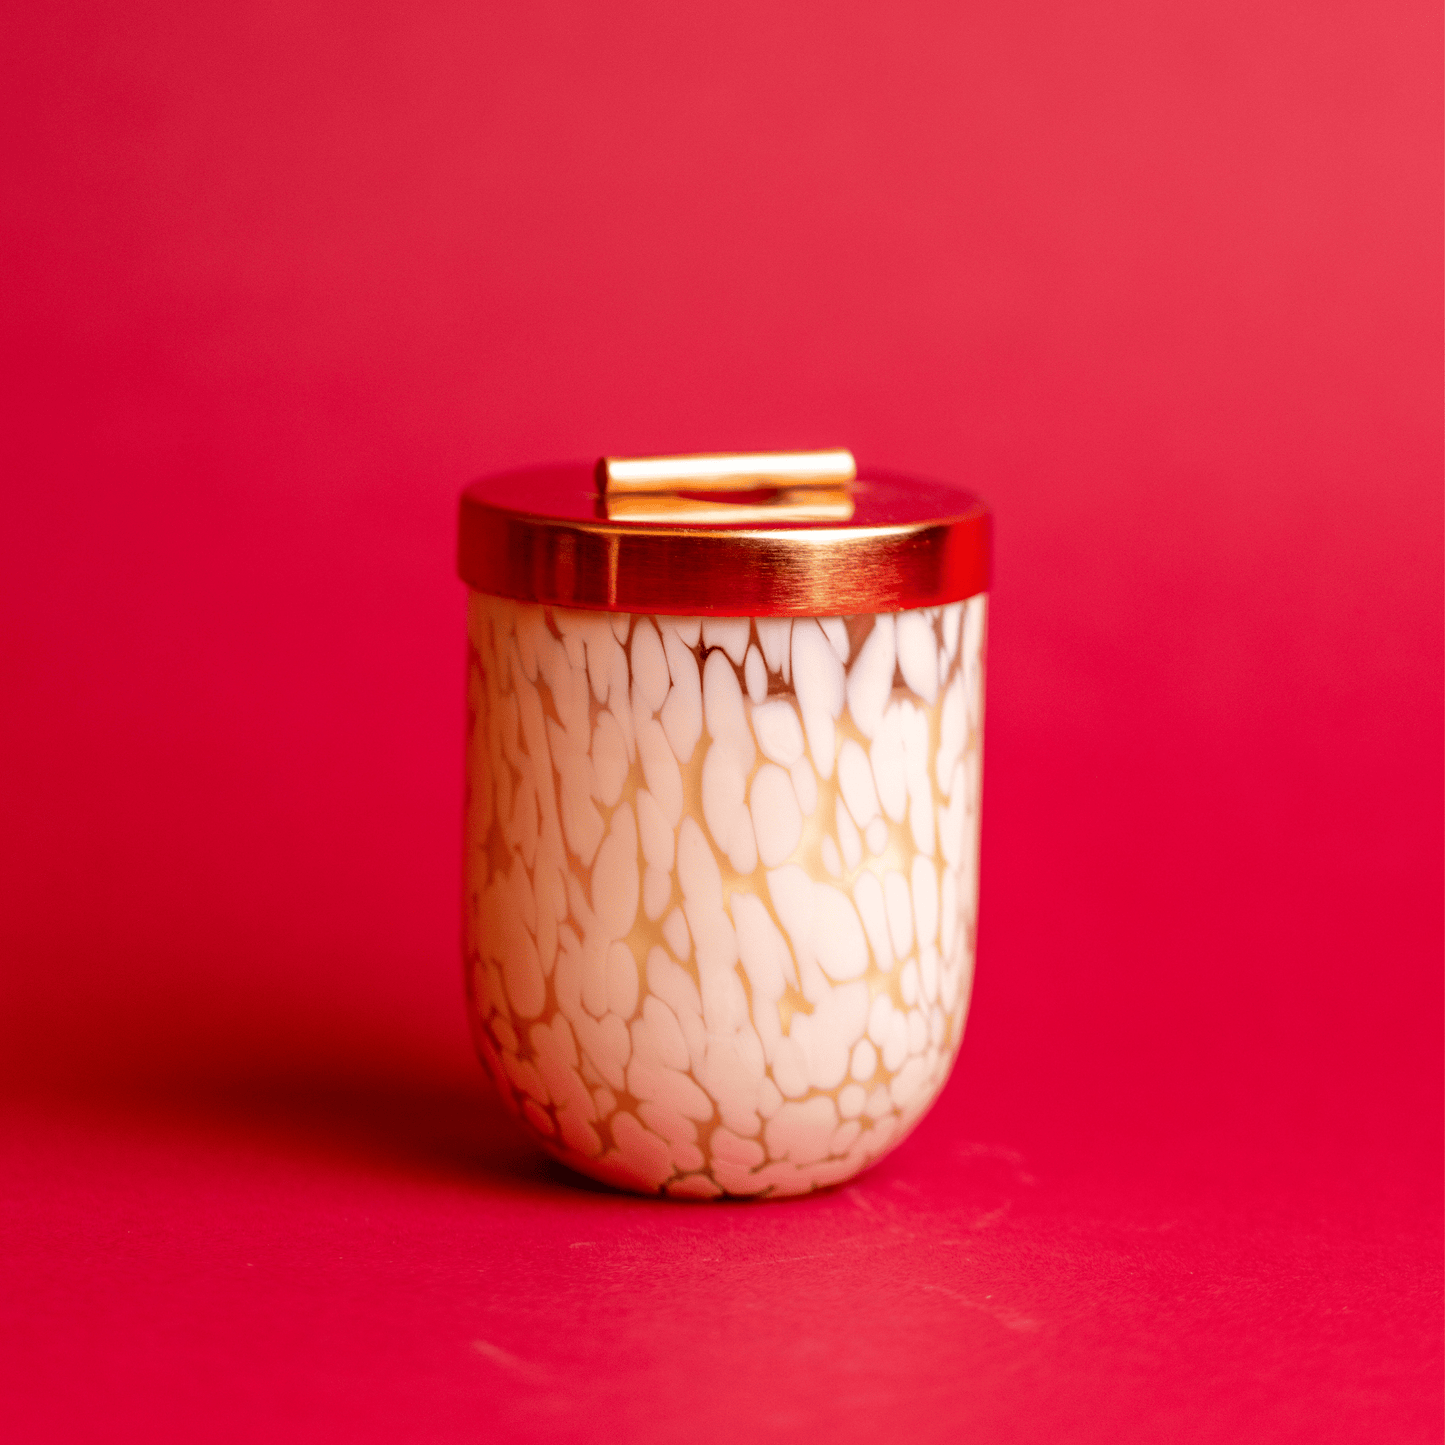 White Blown Glass Candle with lid on on red background